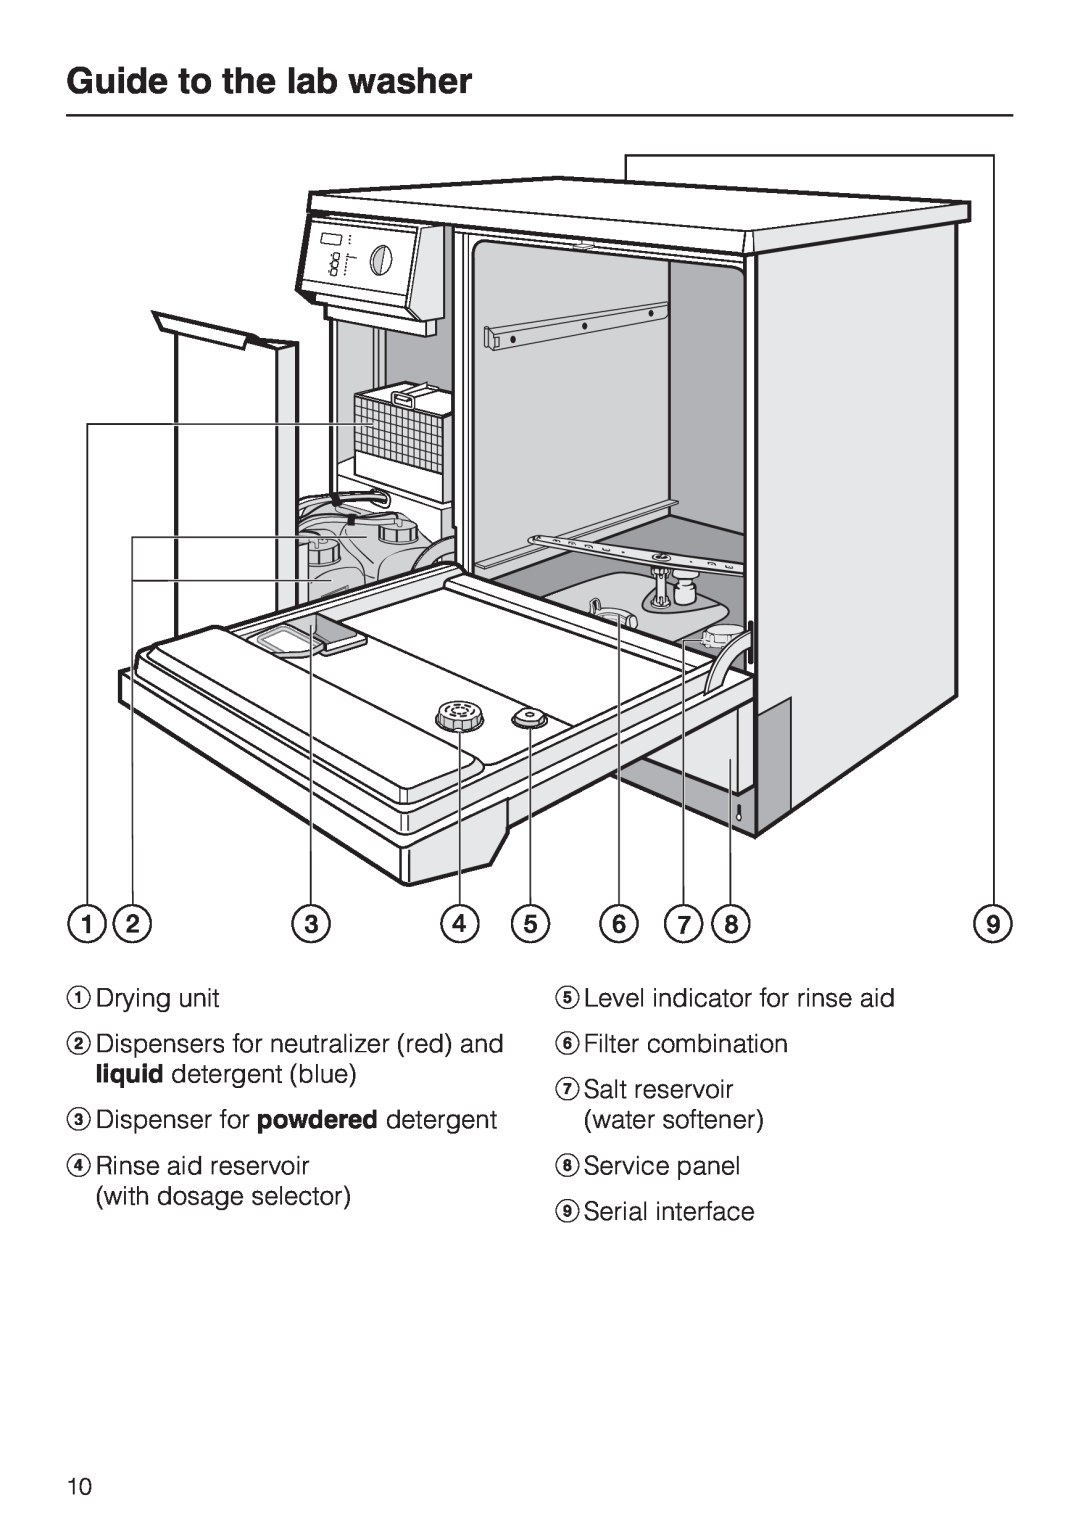 Miele G 7883 CD installation instructions Guide to the lab washer, a Drying unit, c Dispenser for powdered detergent 